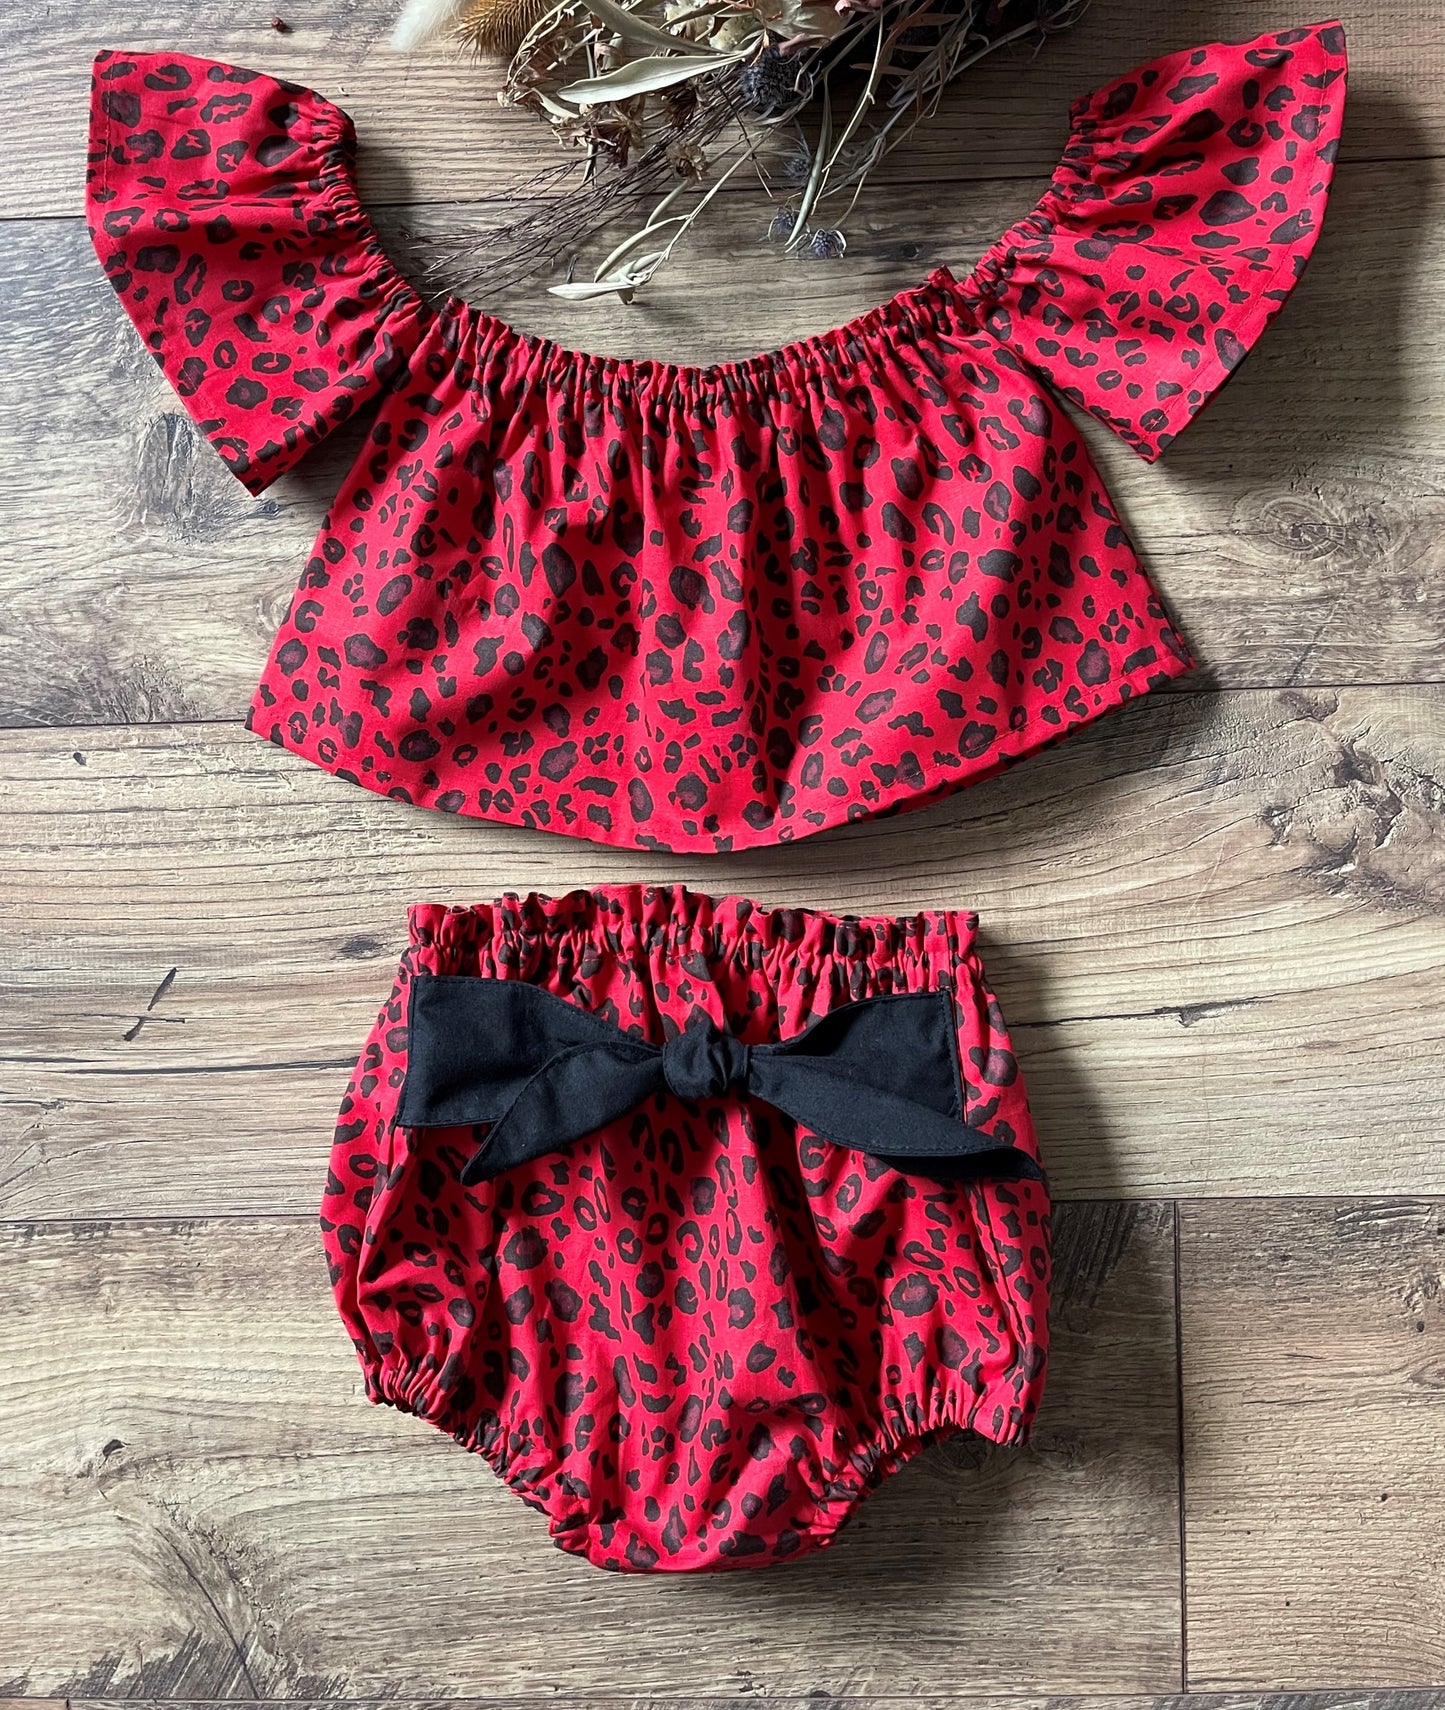 Girls Red Leopard Infant Toddler 2 Piece Cheetah Outfit